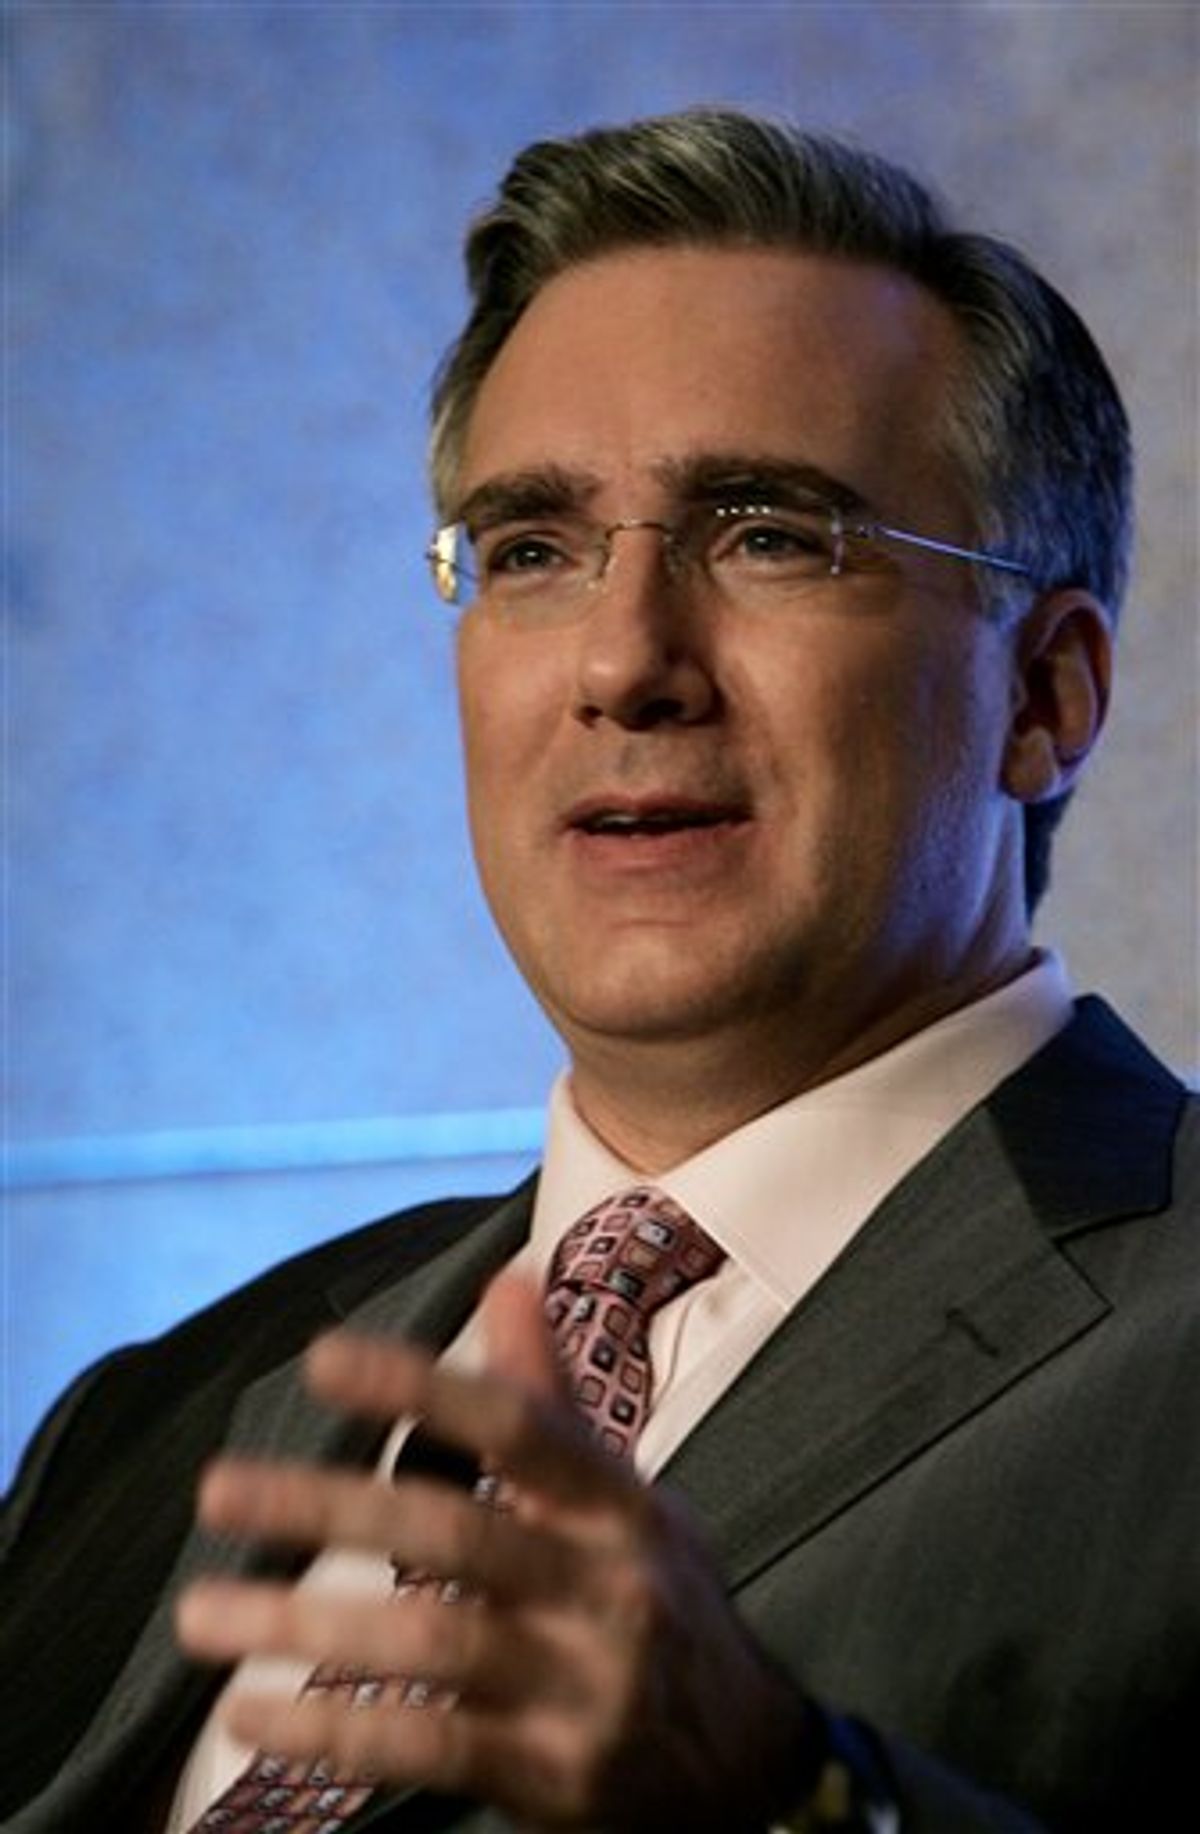 FILE - In this July 22, 2006 file photo, Keith Olbermann, host of the MSNBC show, "Countdown With Keith Olbermann," talks about his show at the Summer Television Critics Association Press Tour in Pasadena, Calif. MSNBC has suspended prime-time host Keith Olbermann indefinitely without pay for contributing to the campaigns of three Democratic candidates this election season. Olbermann acknowledged to NBC that he donated $2,400 apiece to the campaigns of Kentucky Senate candidate Jack Conway and Arizona Reps. Raul Grivalva and Gabrielle Giffords. (AP Photo/Reed Saxon, file) (AP)